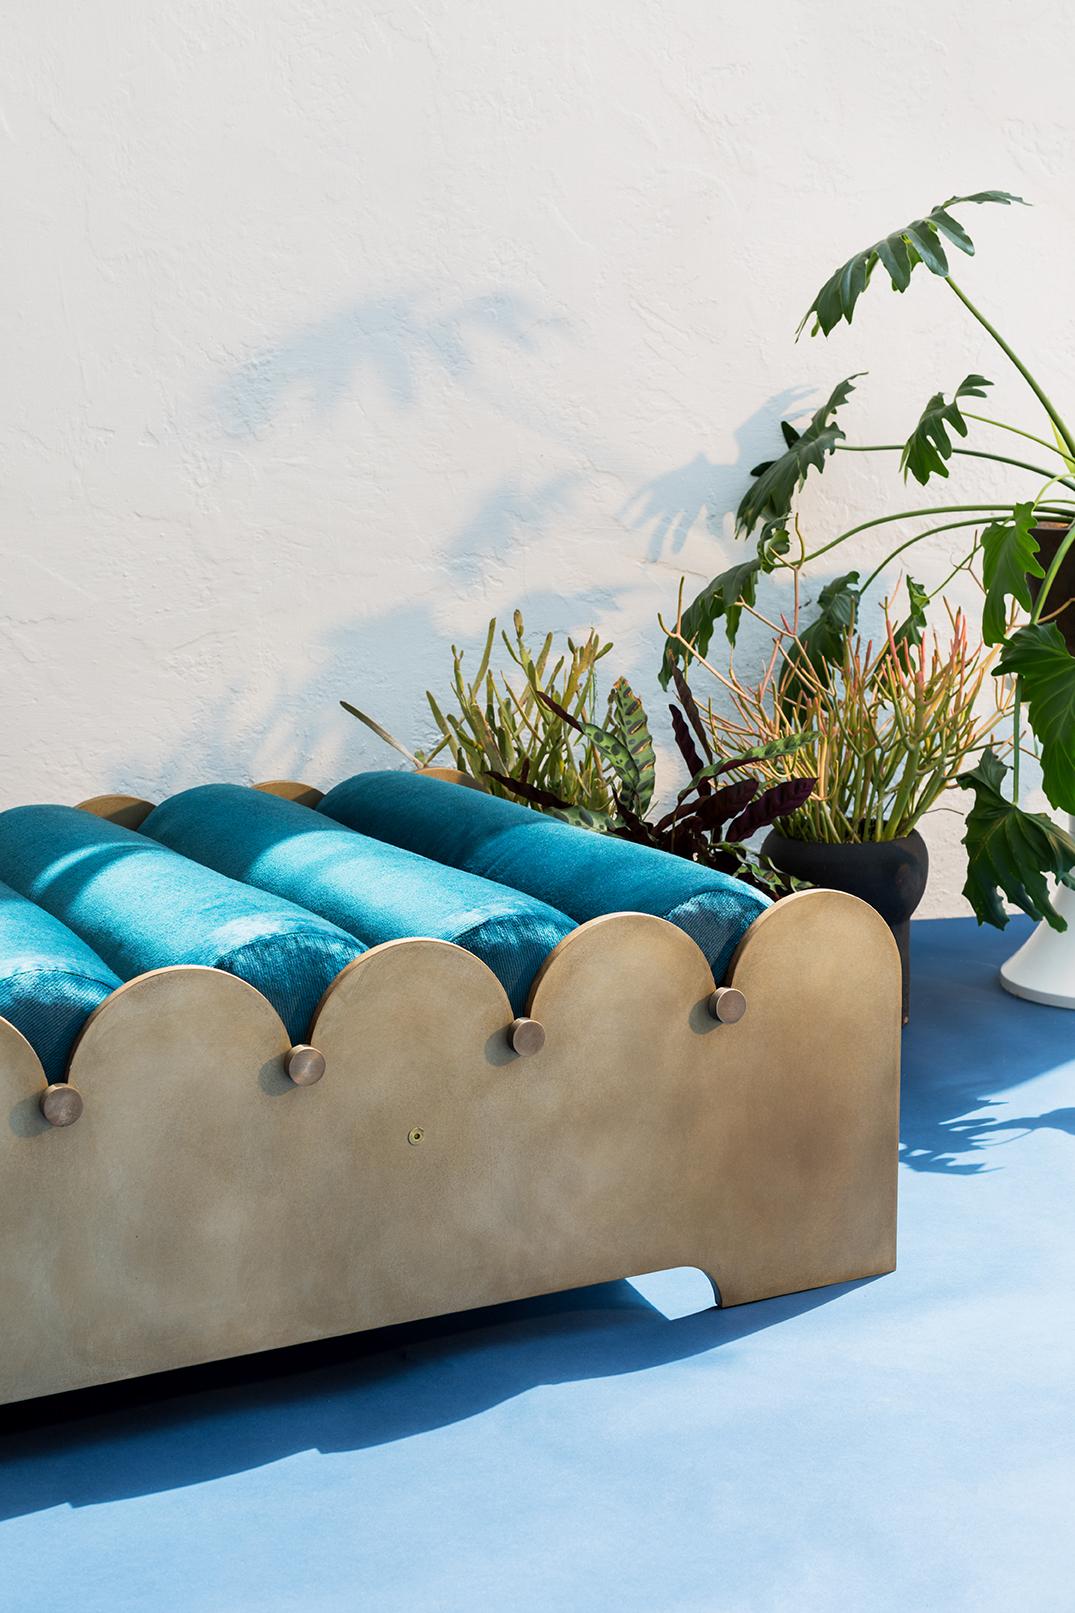 A series of bolsters are threaded between two aluminum rails that evoke the waves of the Pacific. The Bobbin bench is suitable for indoor or outdoor use. Stainless steel rods thread through each outdoor quality cushion and connect the patinated